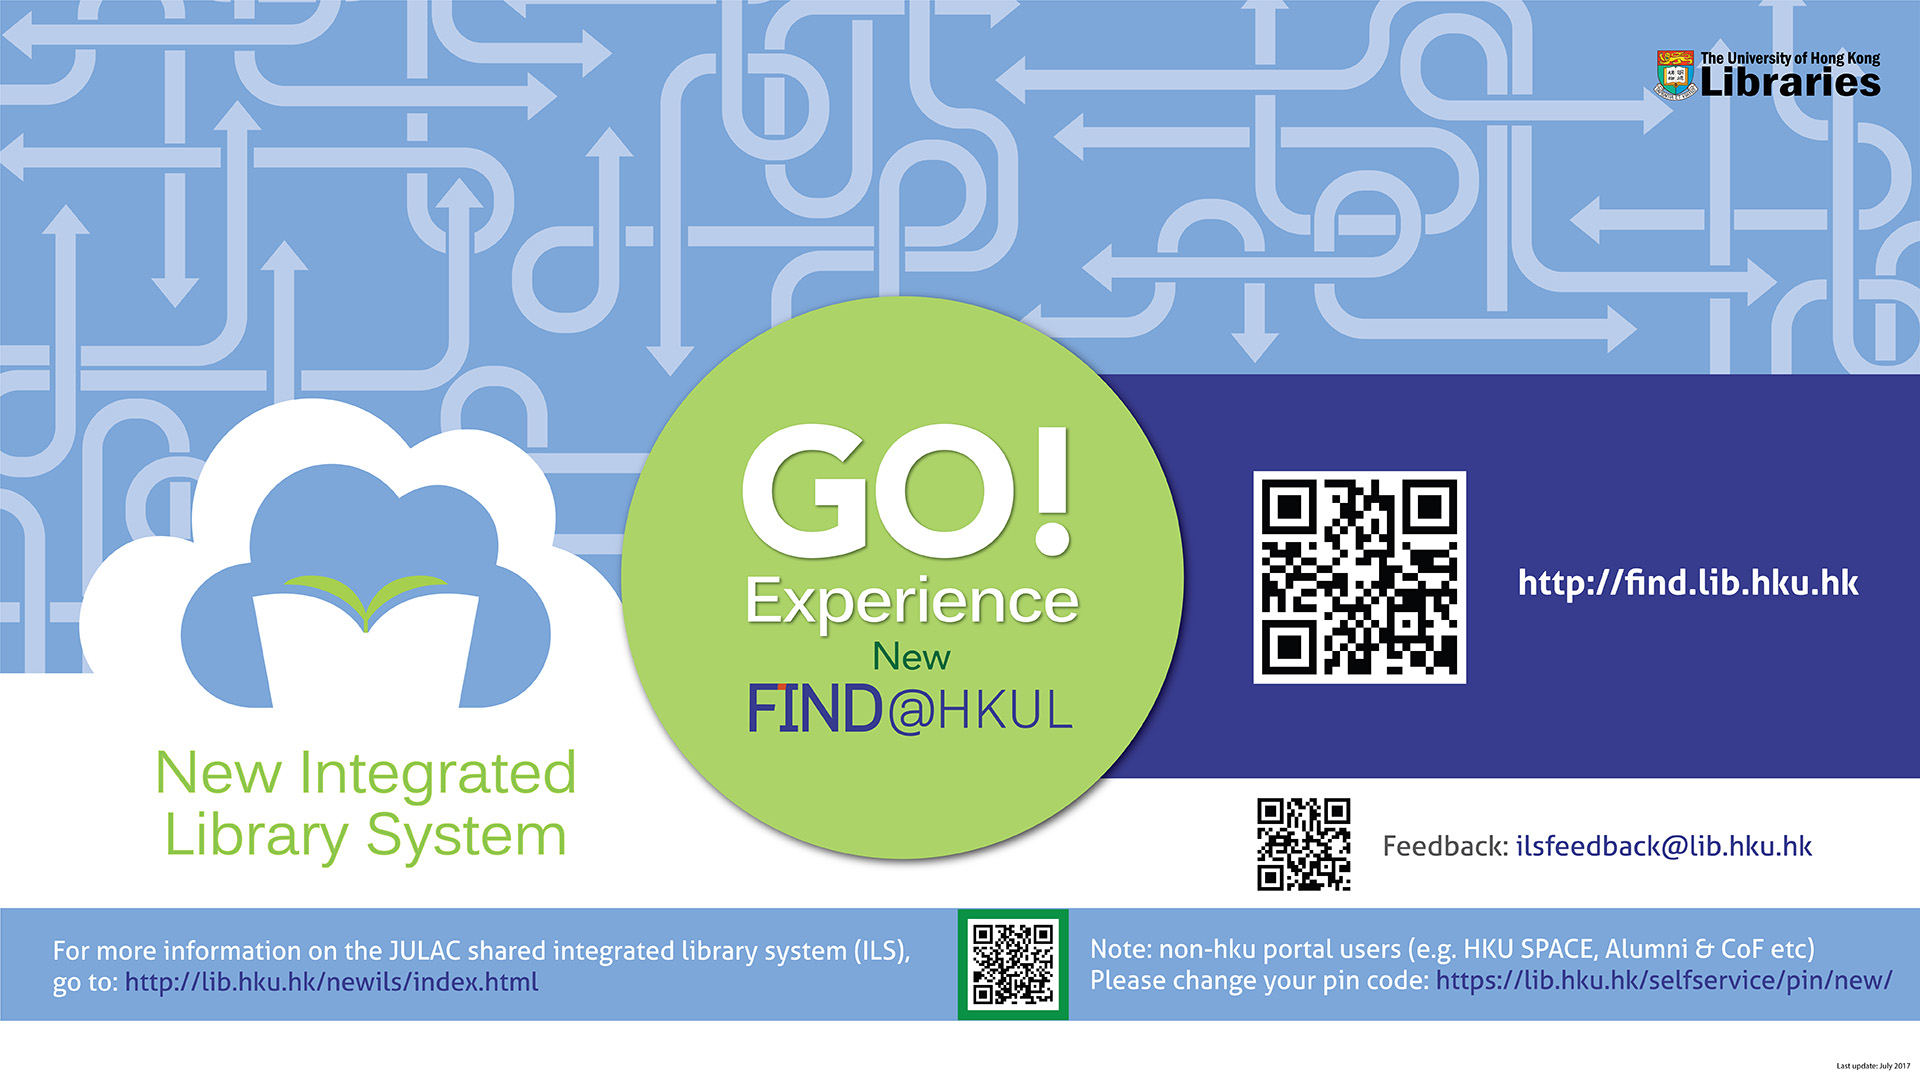 GO! Experience the New FIND@HKUL search tool